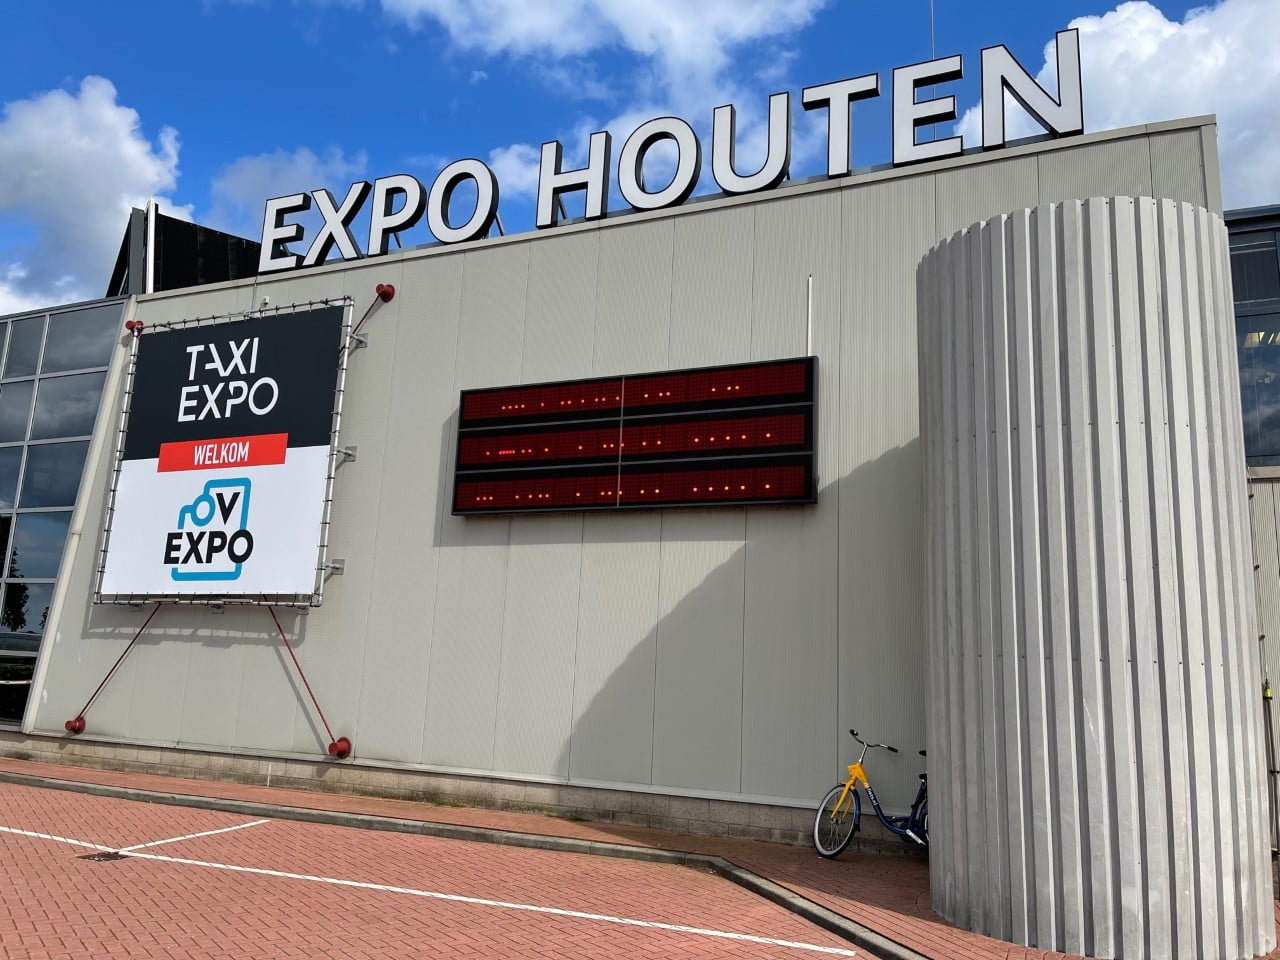 Taxi Expo, a special meeting place